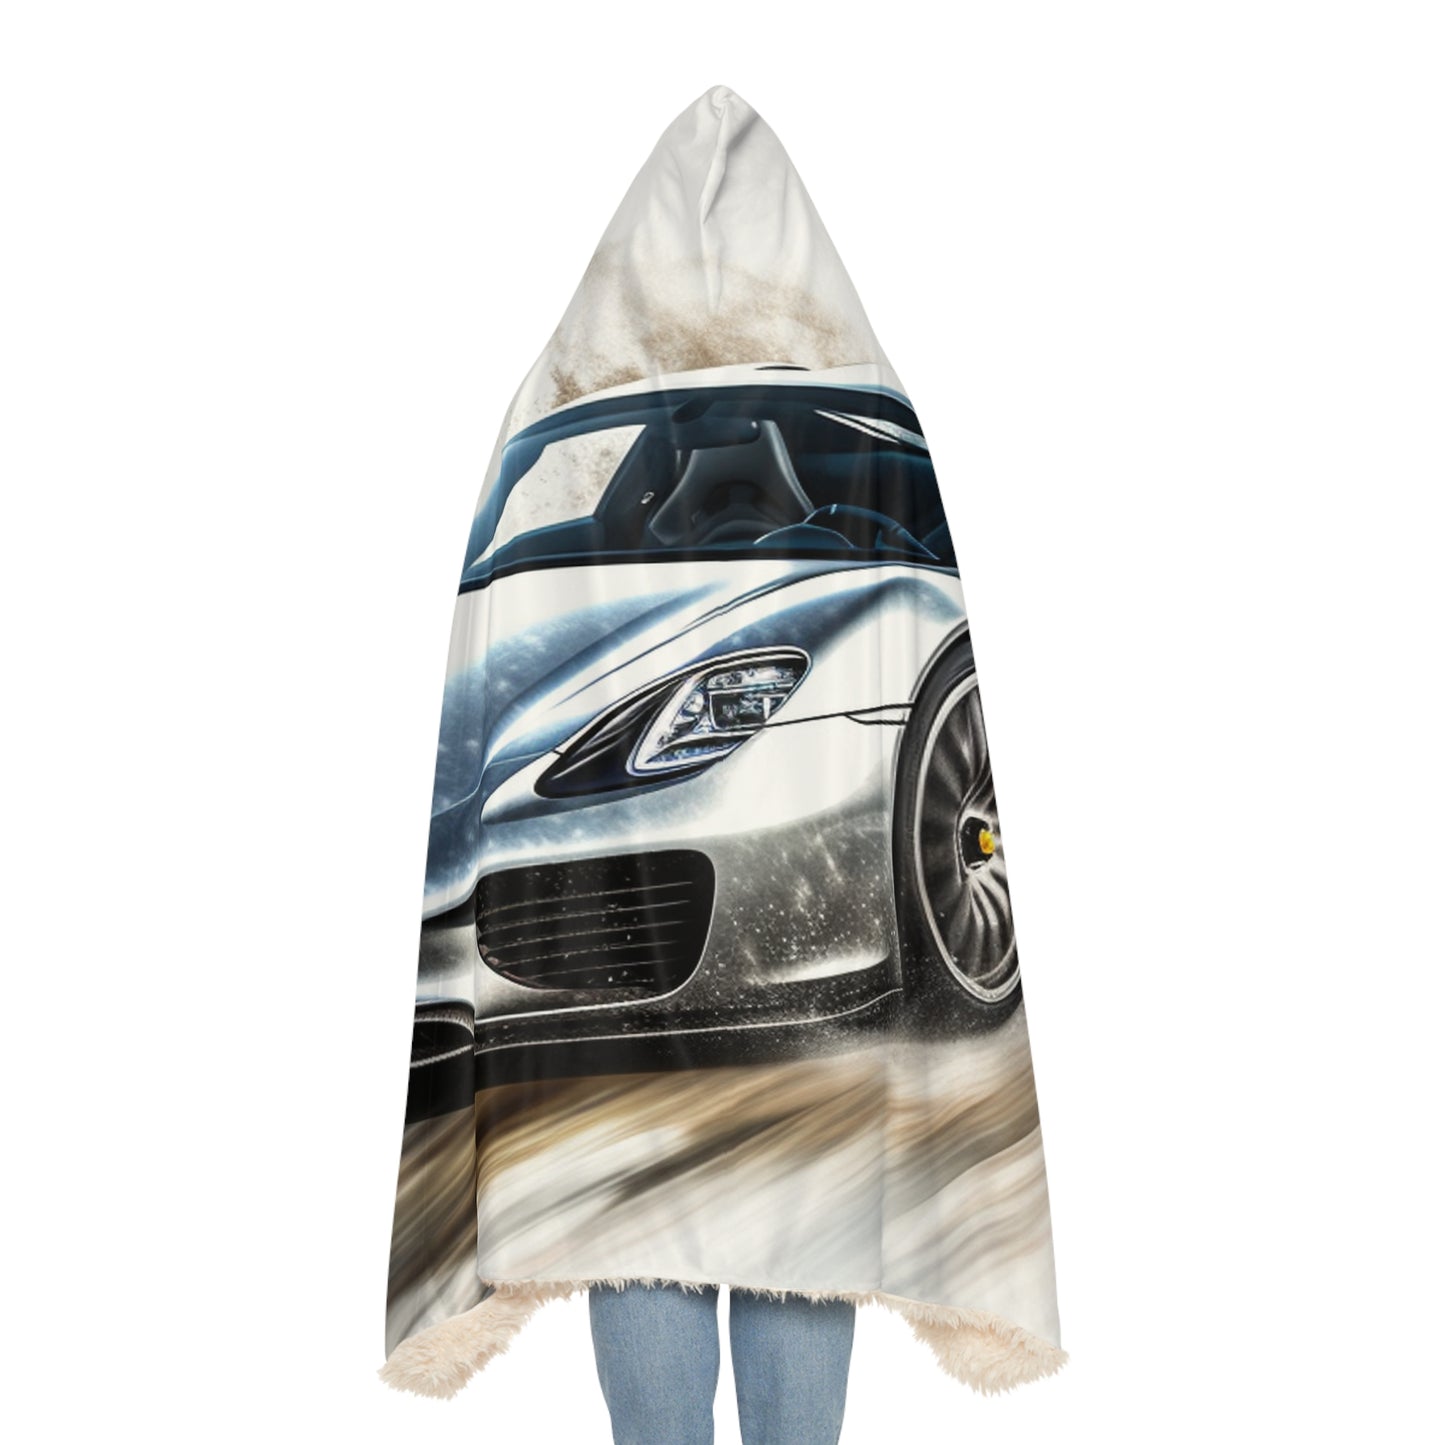 Snuggle Hooded Blanket 918 Spyder white background driving fast with water splashing 2